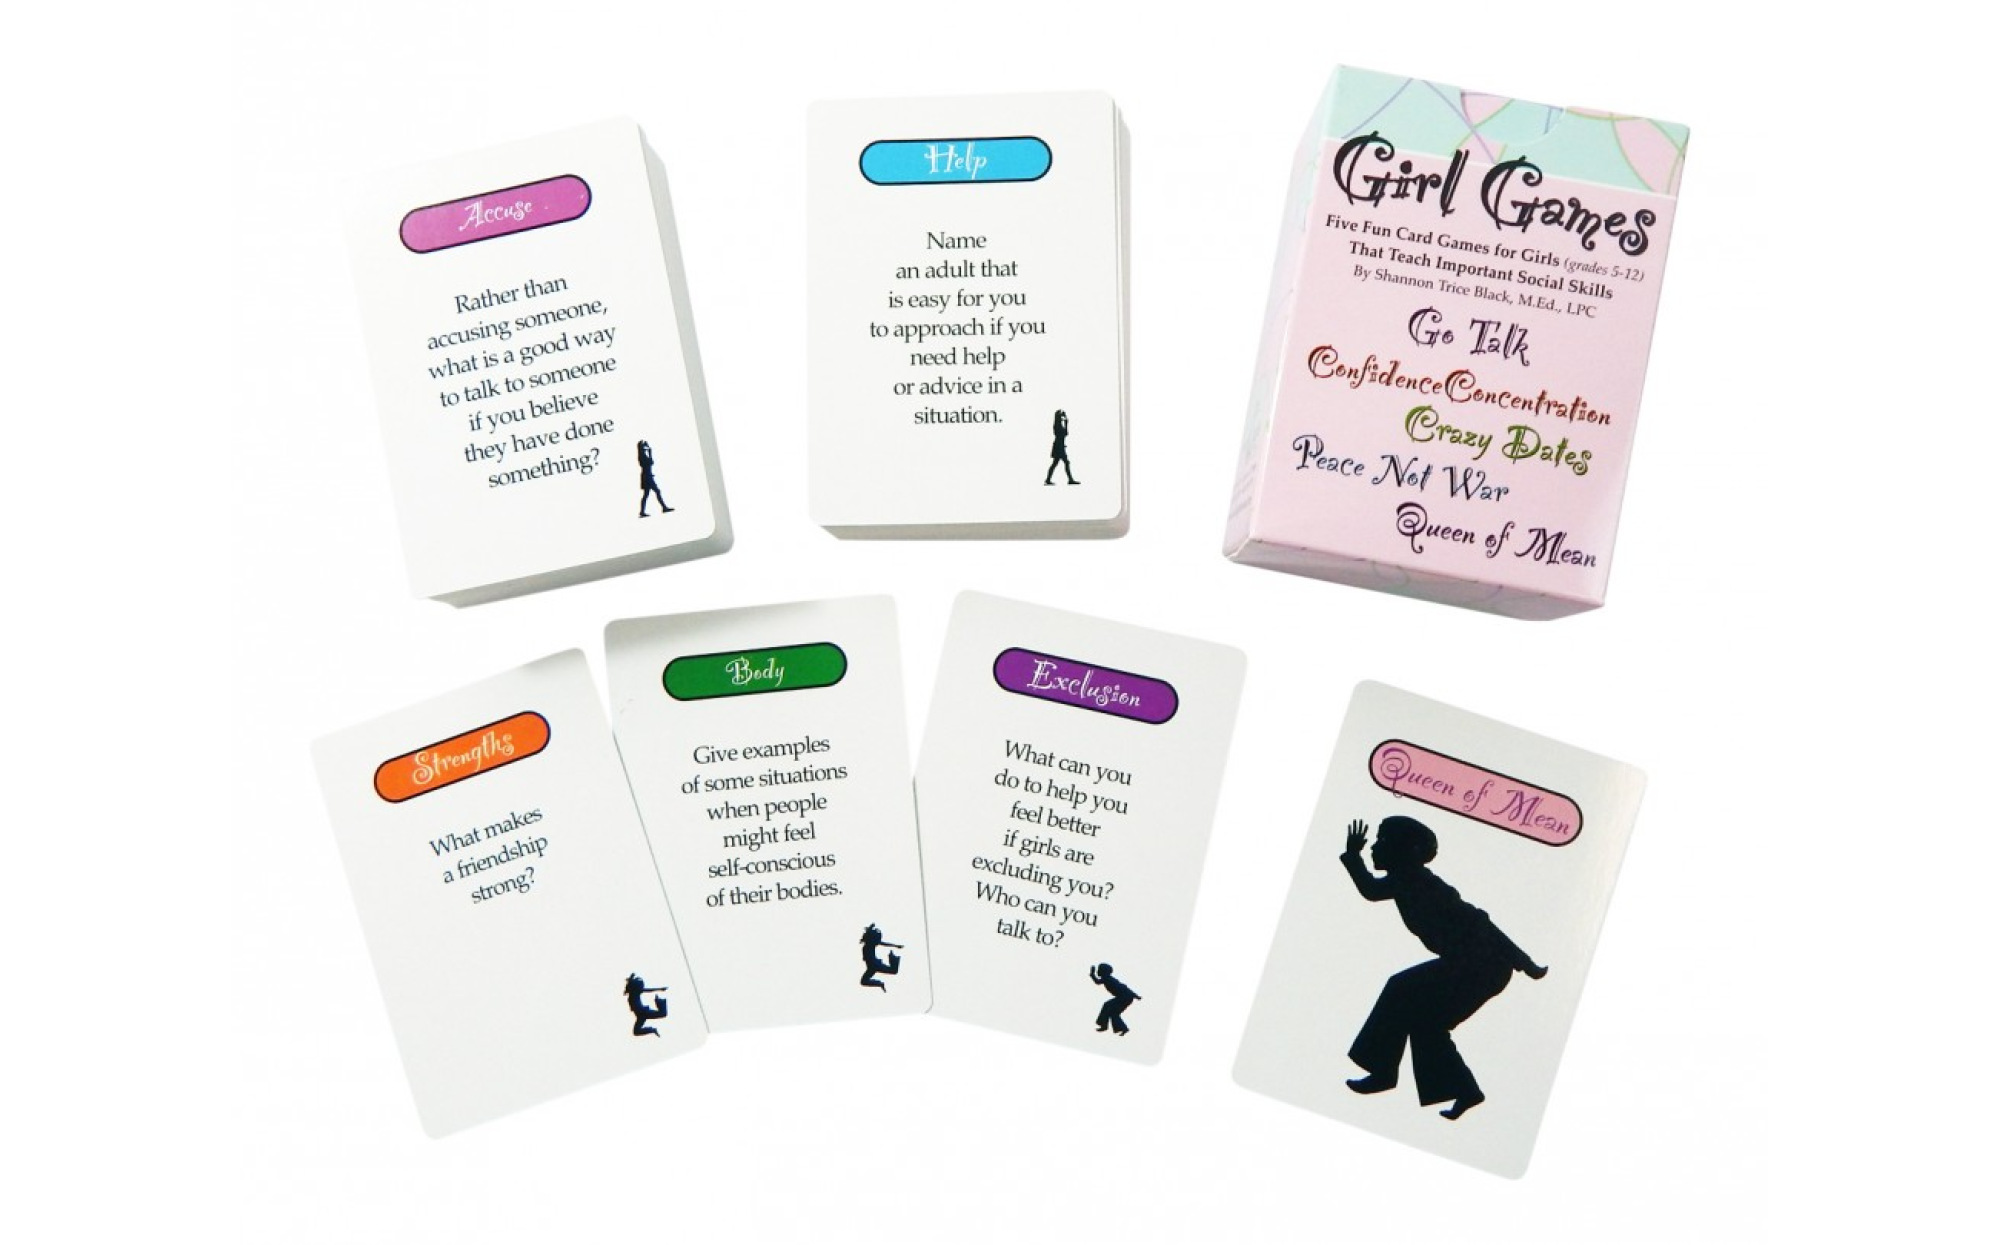 Play Games for Girls - Girl Games